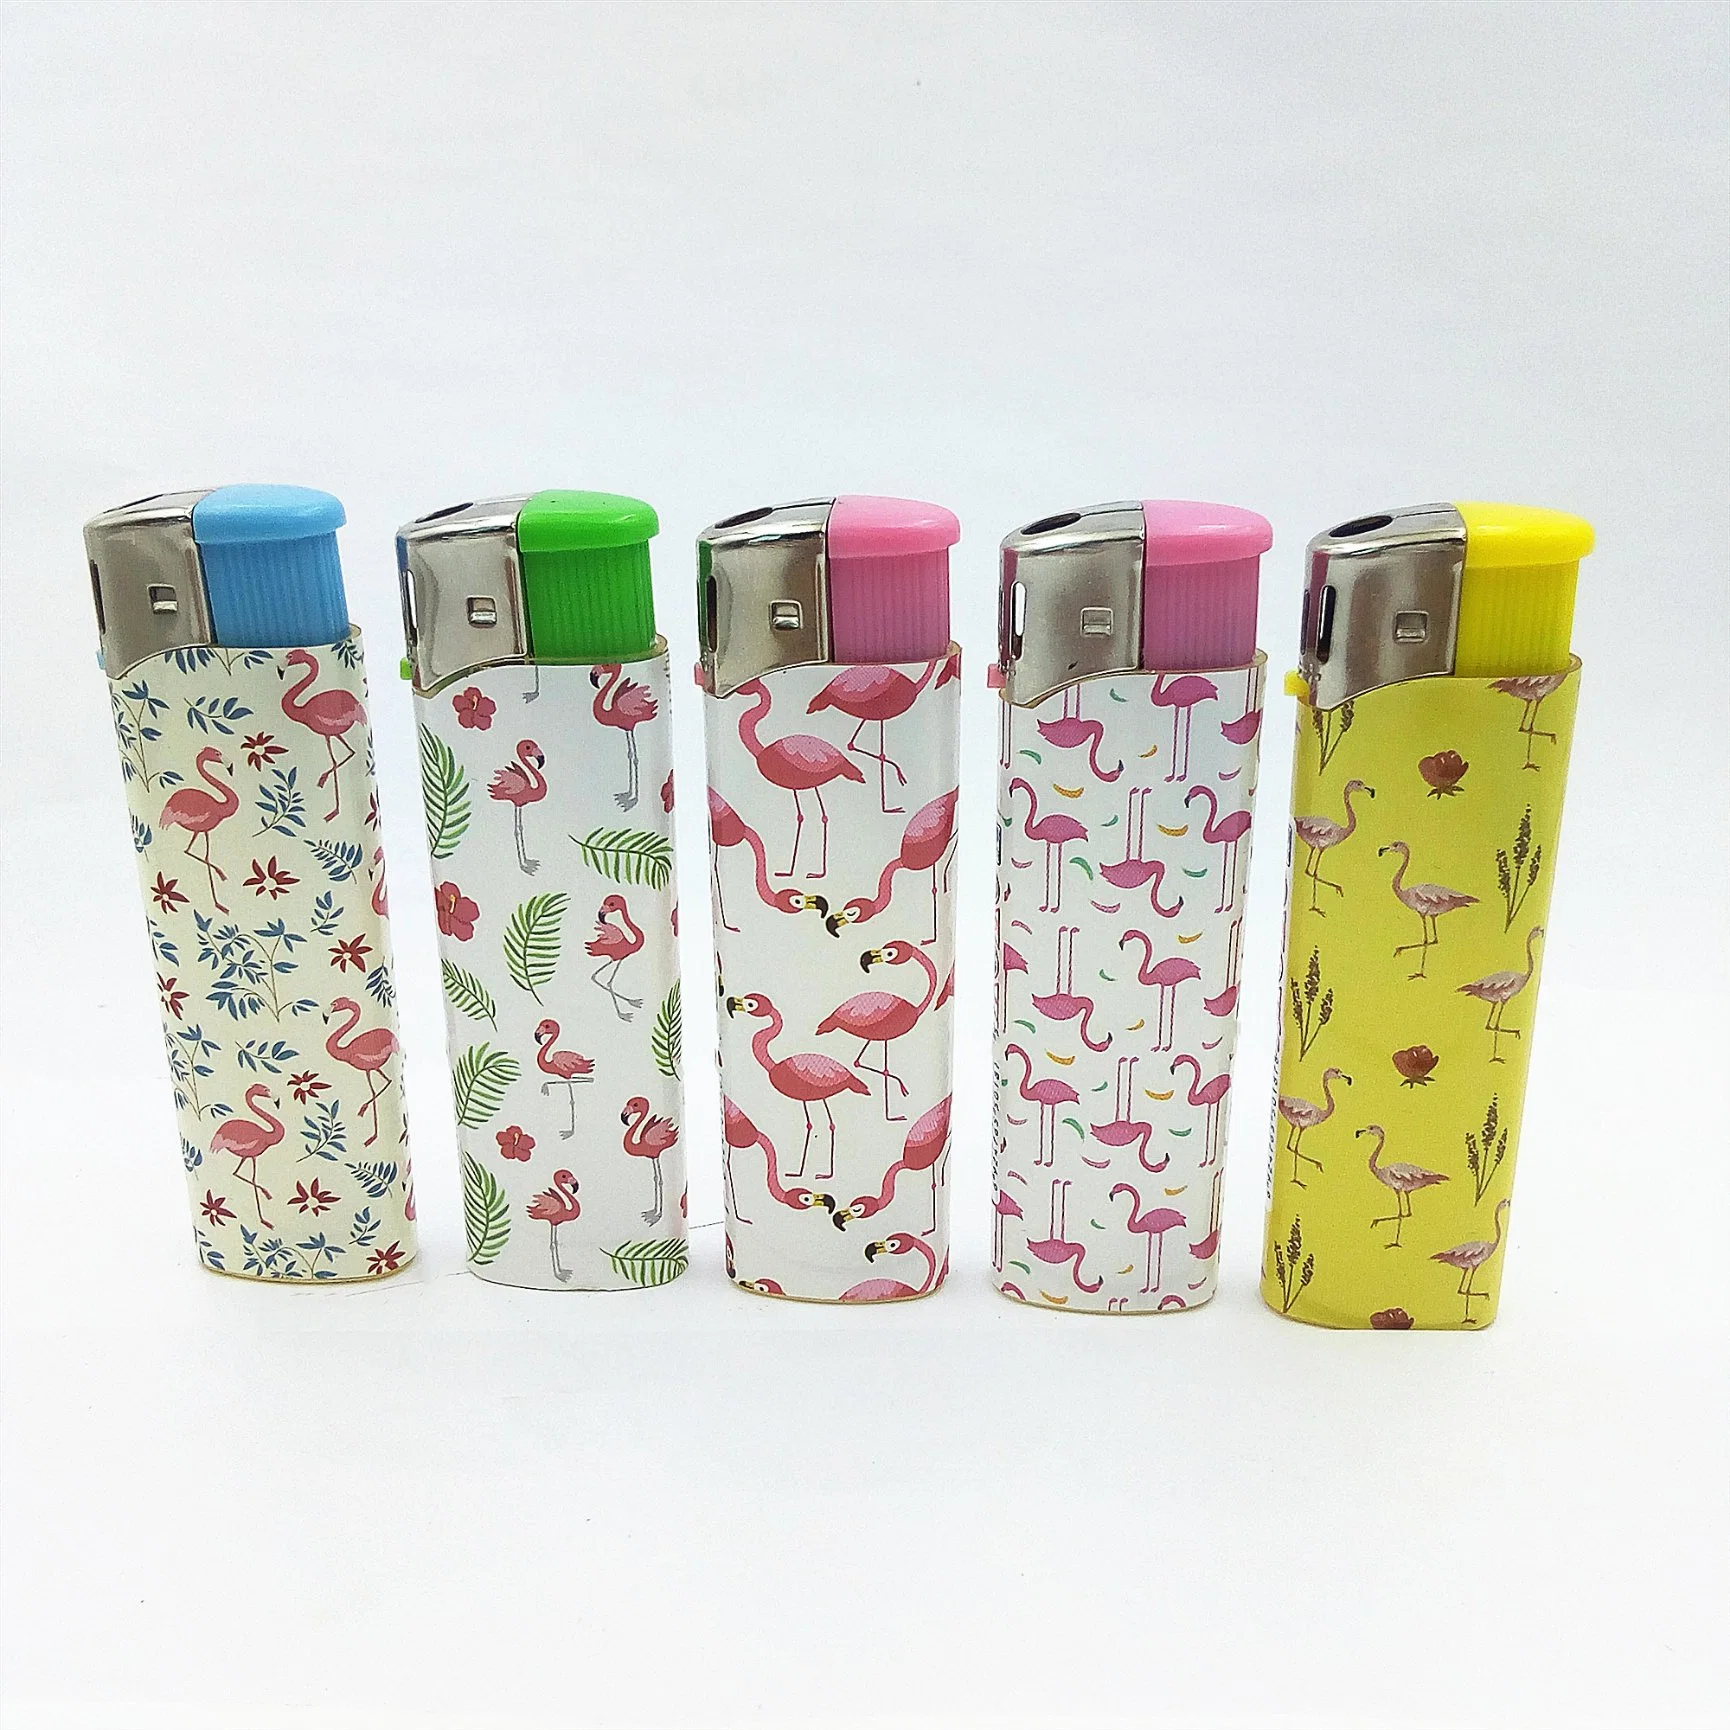 Nan Dongyi High quality/High cost performance EUR Standard Plastic Electric Cigarette Electric Lighter Children Resistance